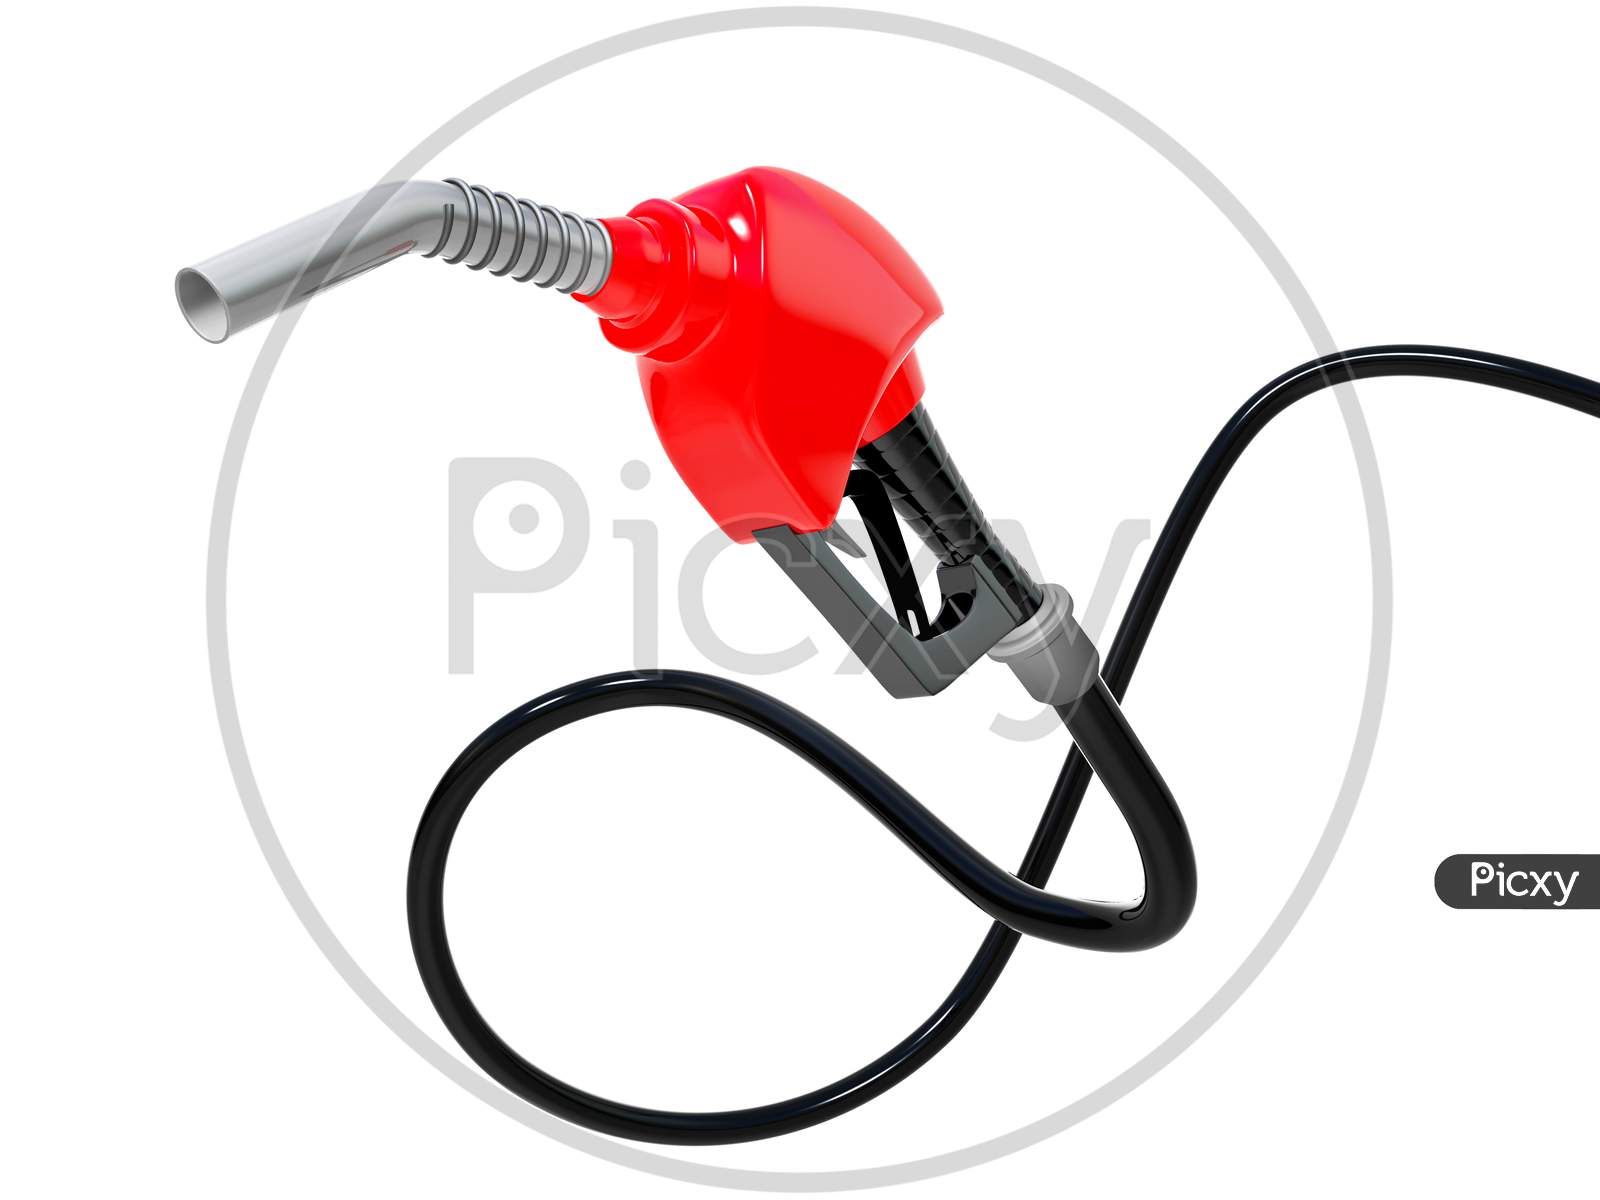 3D render of petrol nozzle isolated on white